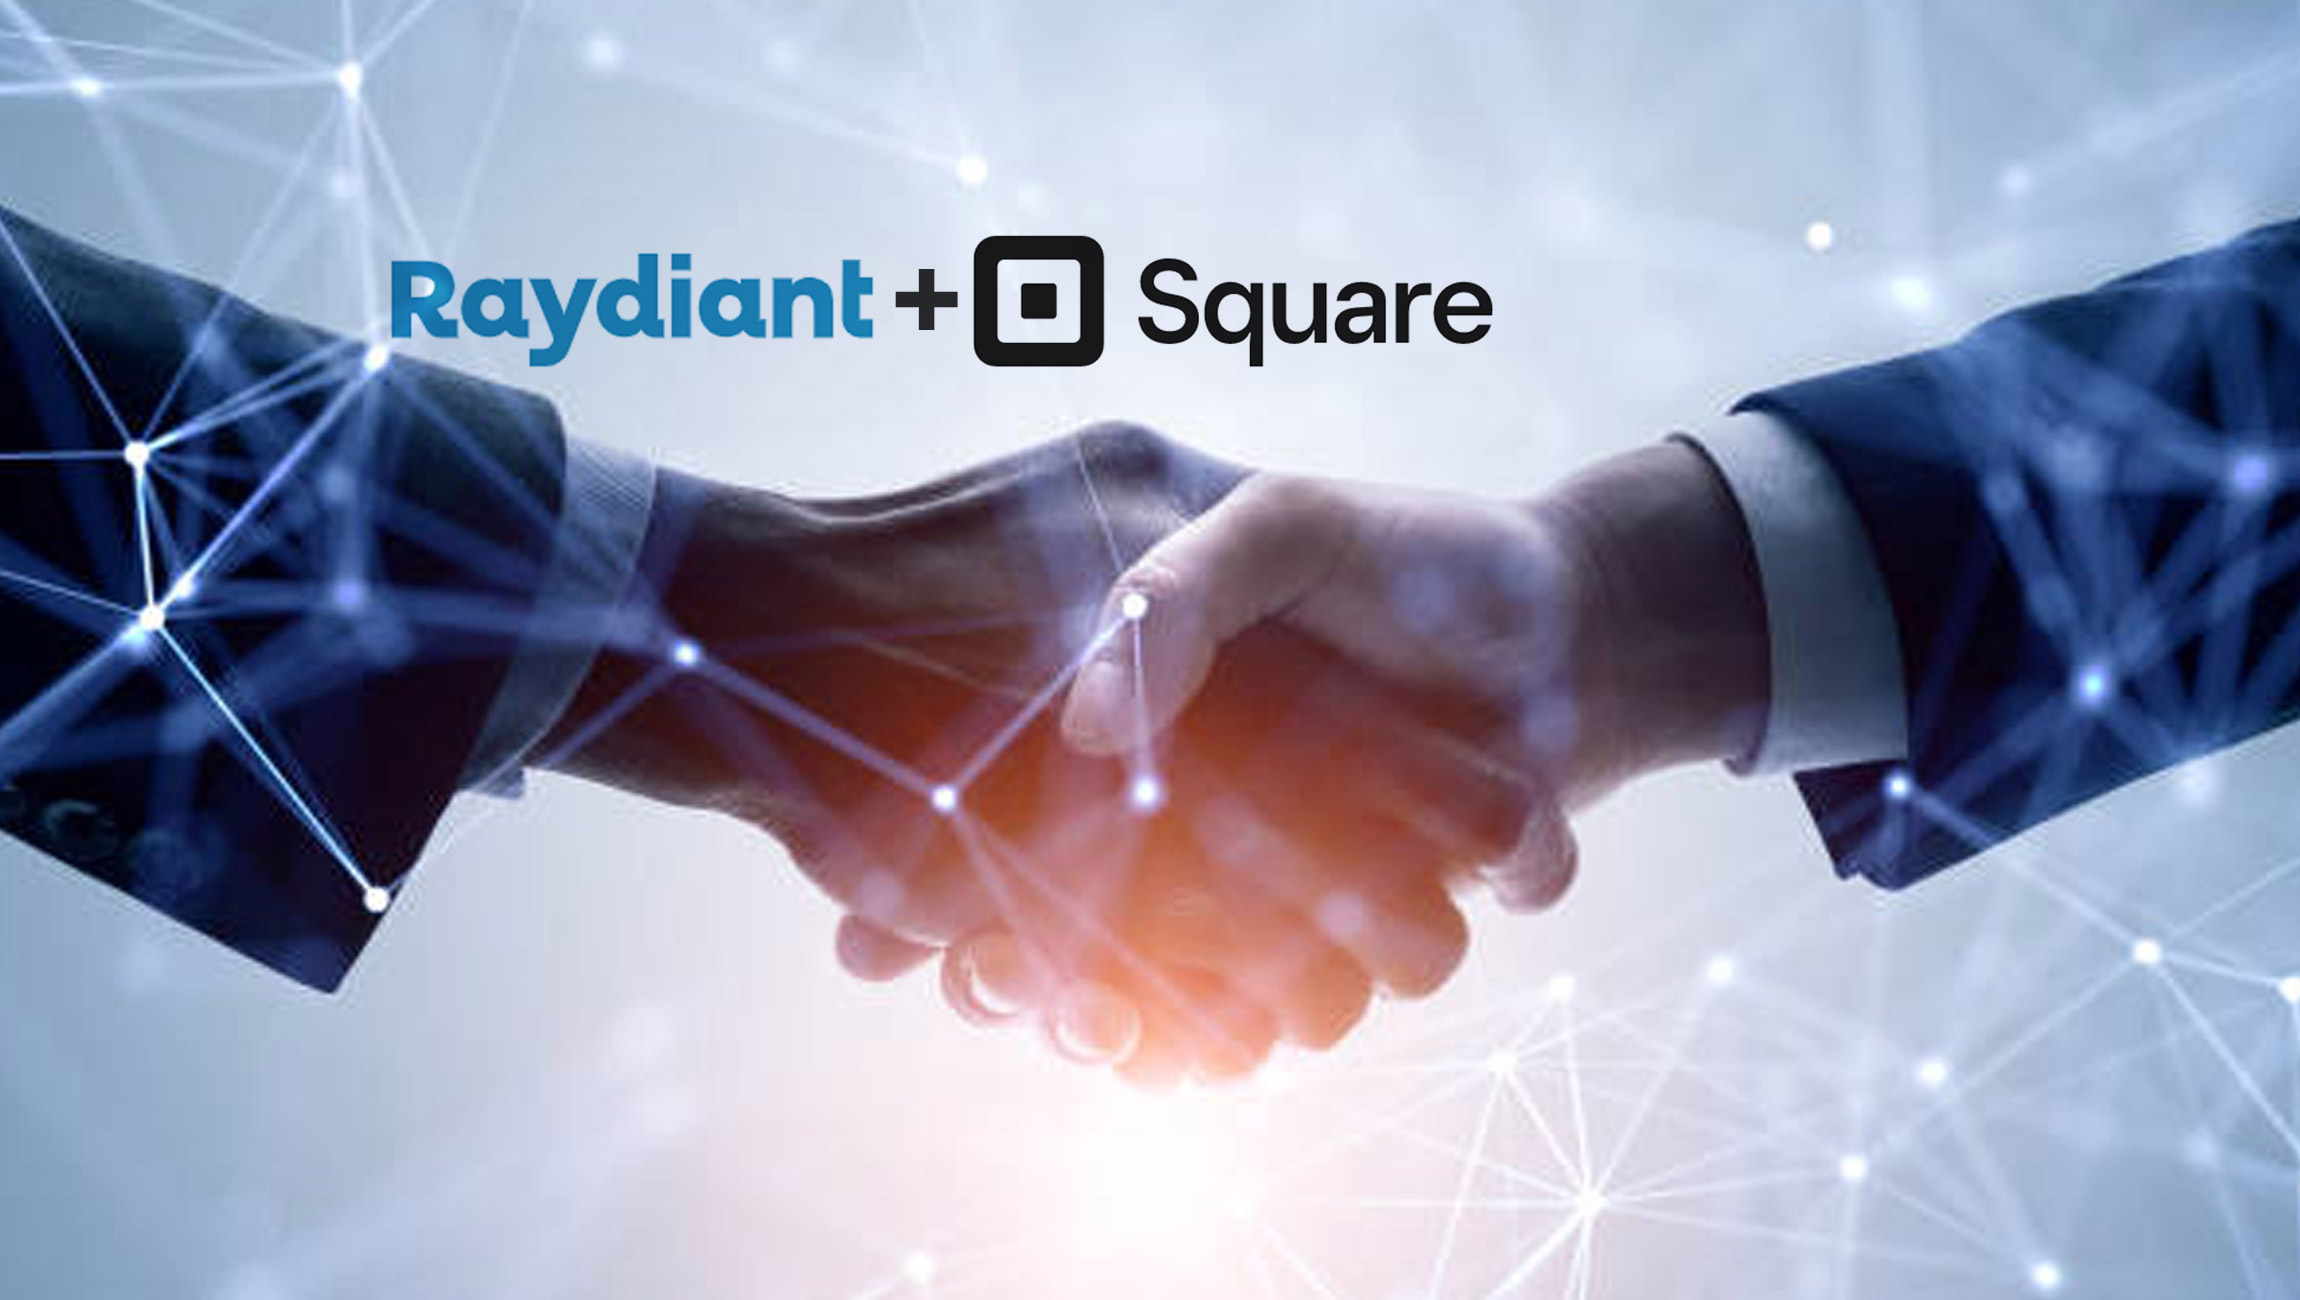 Raydiant's Partnership With Square Represents Exciting New Era for Restaurants and Retailers